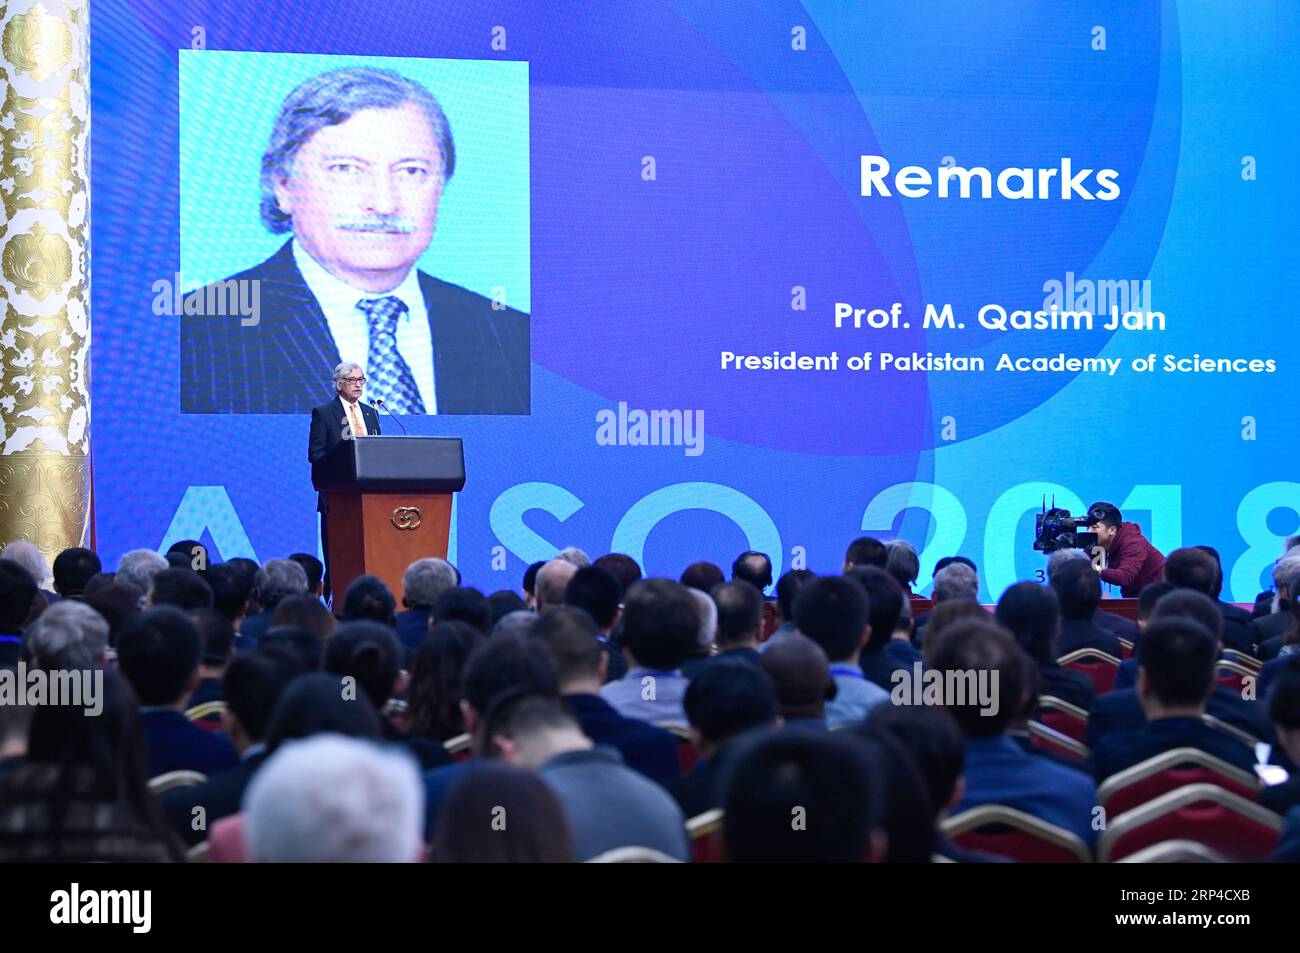 (181104) -- BEIJING, Nov. 4, 2018 -- Prof. M. Qasim Jan, president of Pakistan Academy of Sciences, delivers a speech at the launching ceremony of the first general assembly of the Alliance of International Science Organizations (ANSO) in the Belt and Road region and the opening of the second international science forum of scientific organizations on the Belt and Road initiative held in Beijing, capital of China, on Nov. 4, 2018. ) (sxk) CHINA-BEIJING-BELT AND ROAD SCIENCE ORGANIZATIONS ALLIANCE-OPEN (CN) ShenxHong PUBLICATIONxNOTxINxCHN Stock Photo